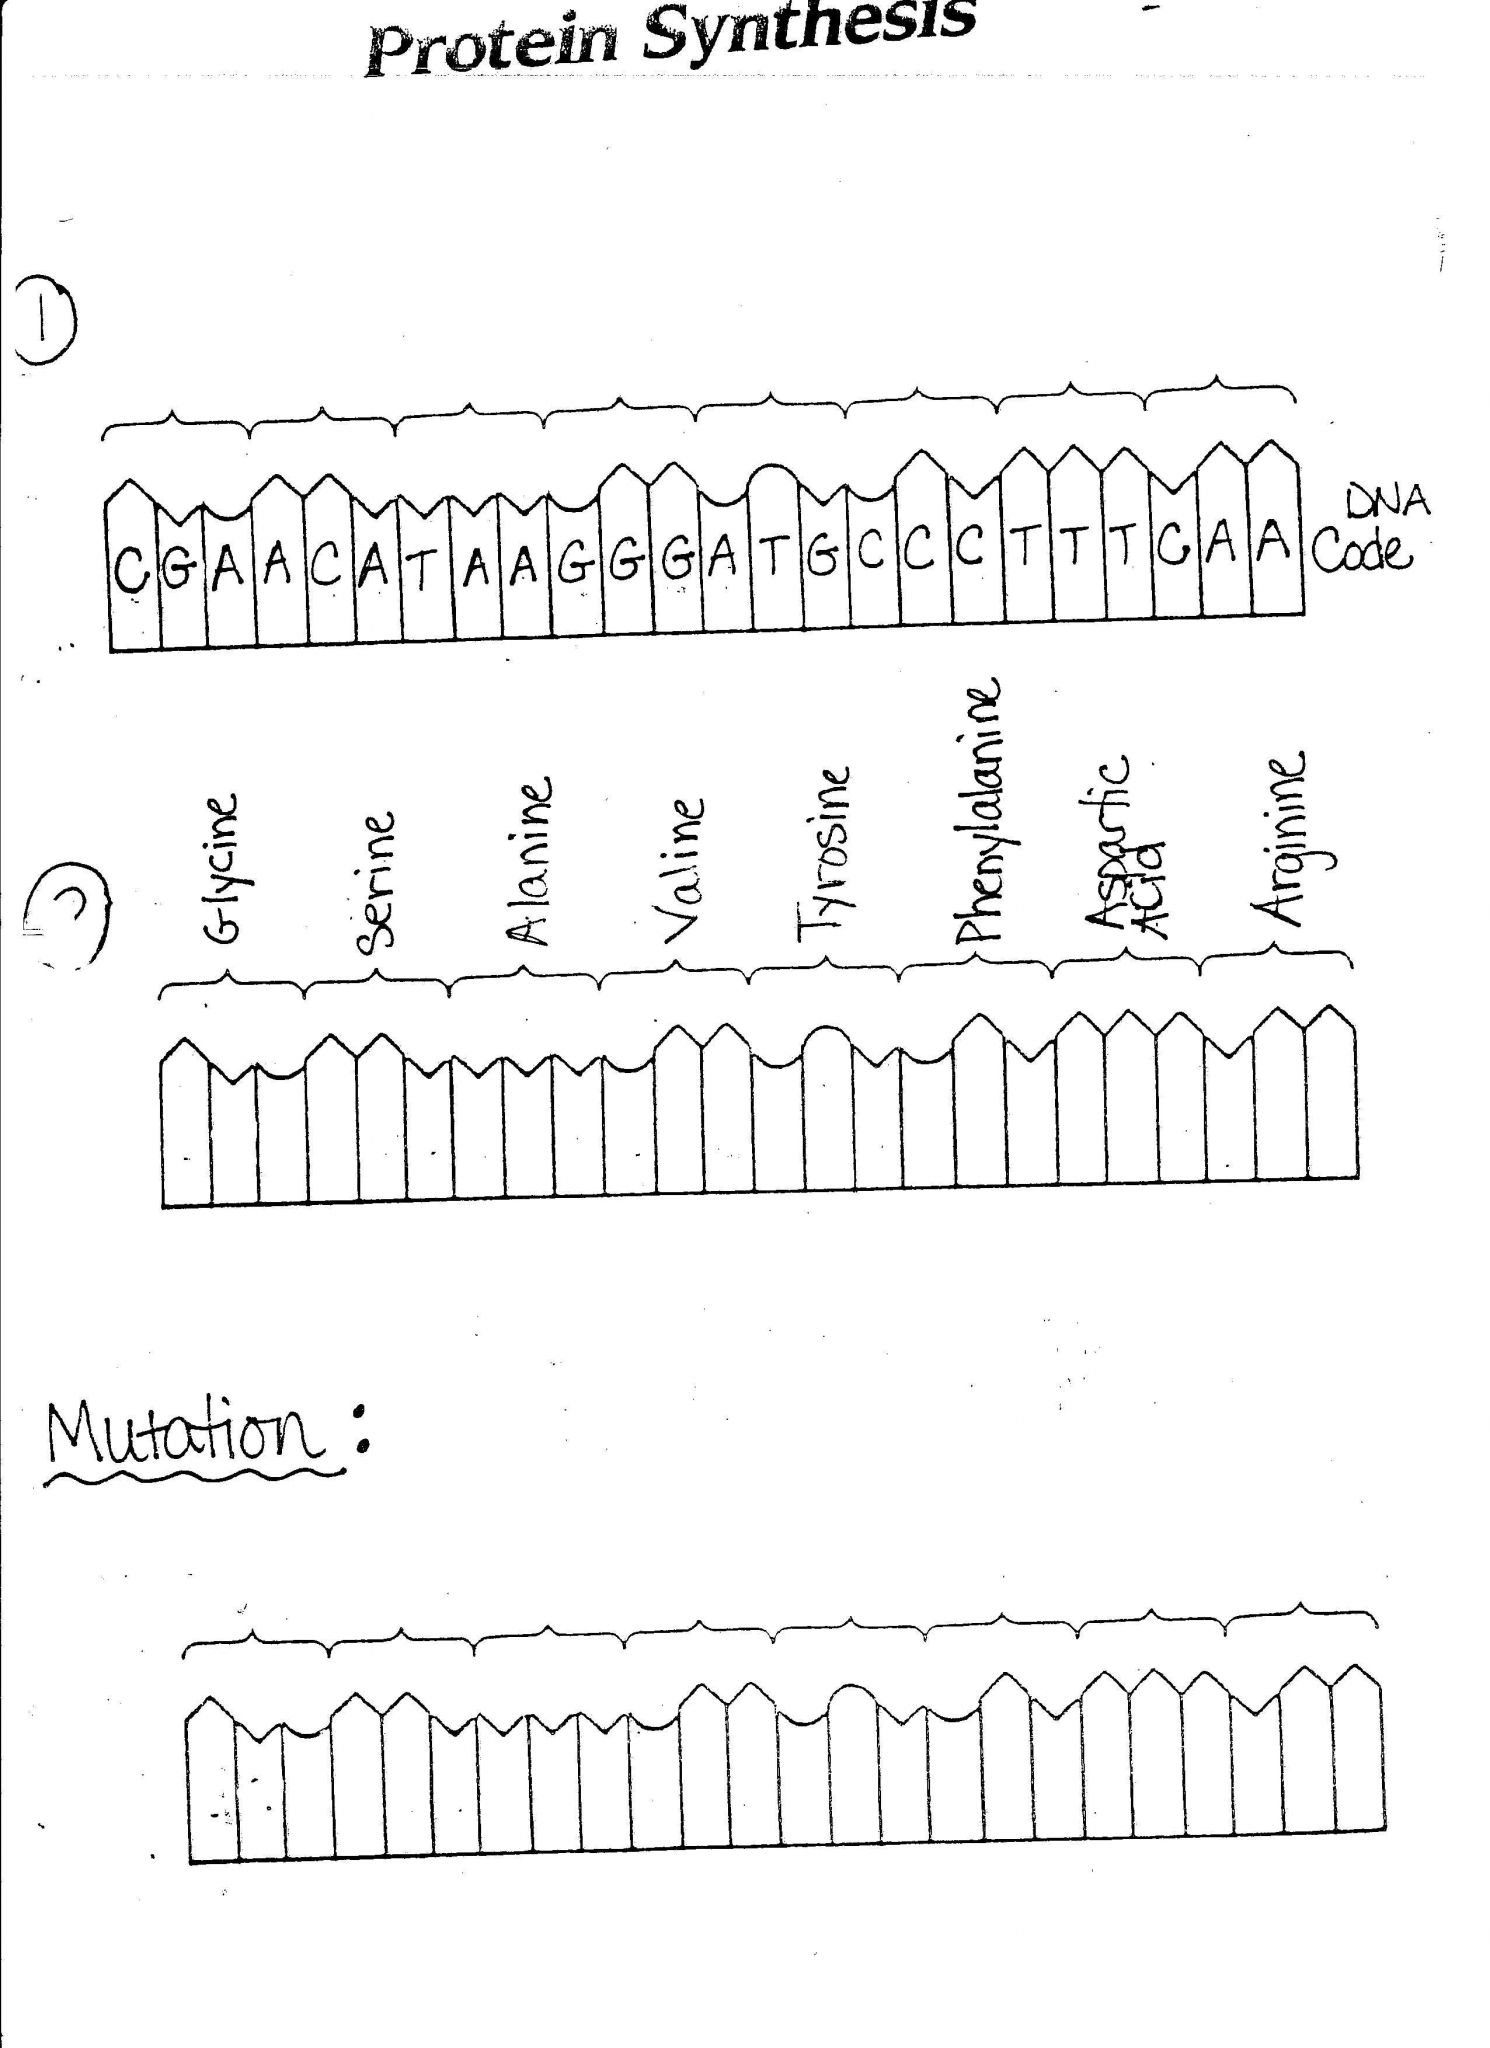 Protein Synthesis Worksheet Answer Key together with Dna Rna and Protein Synthesis Worksheet Image Collections